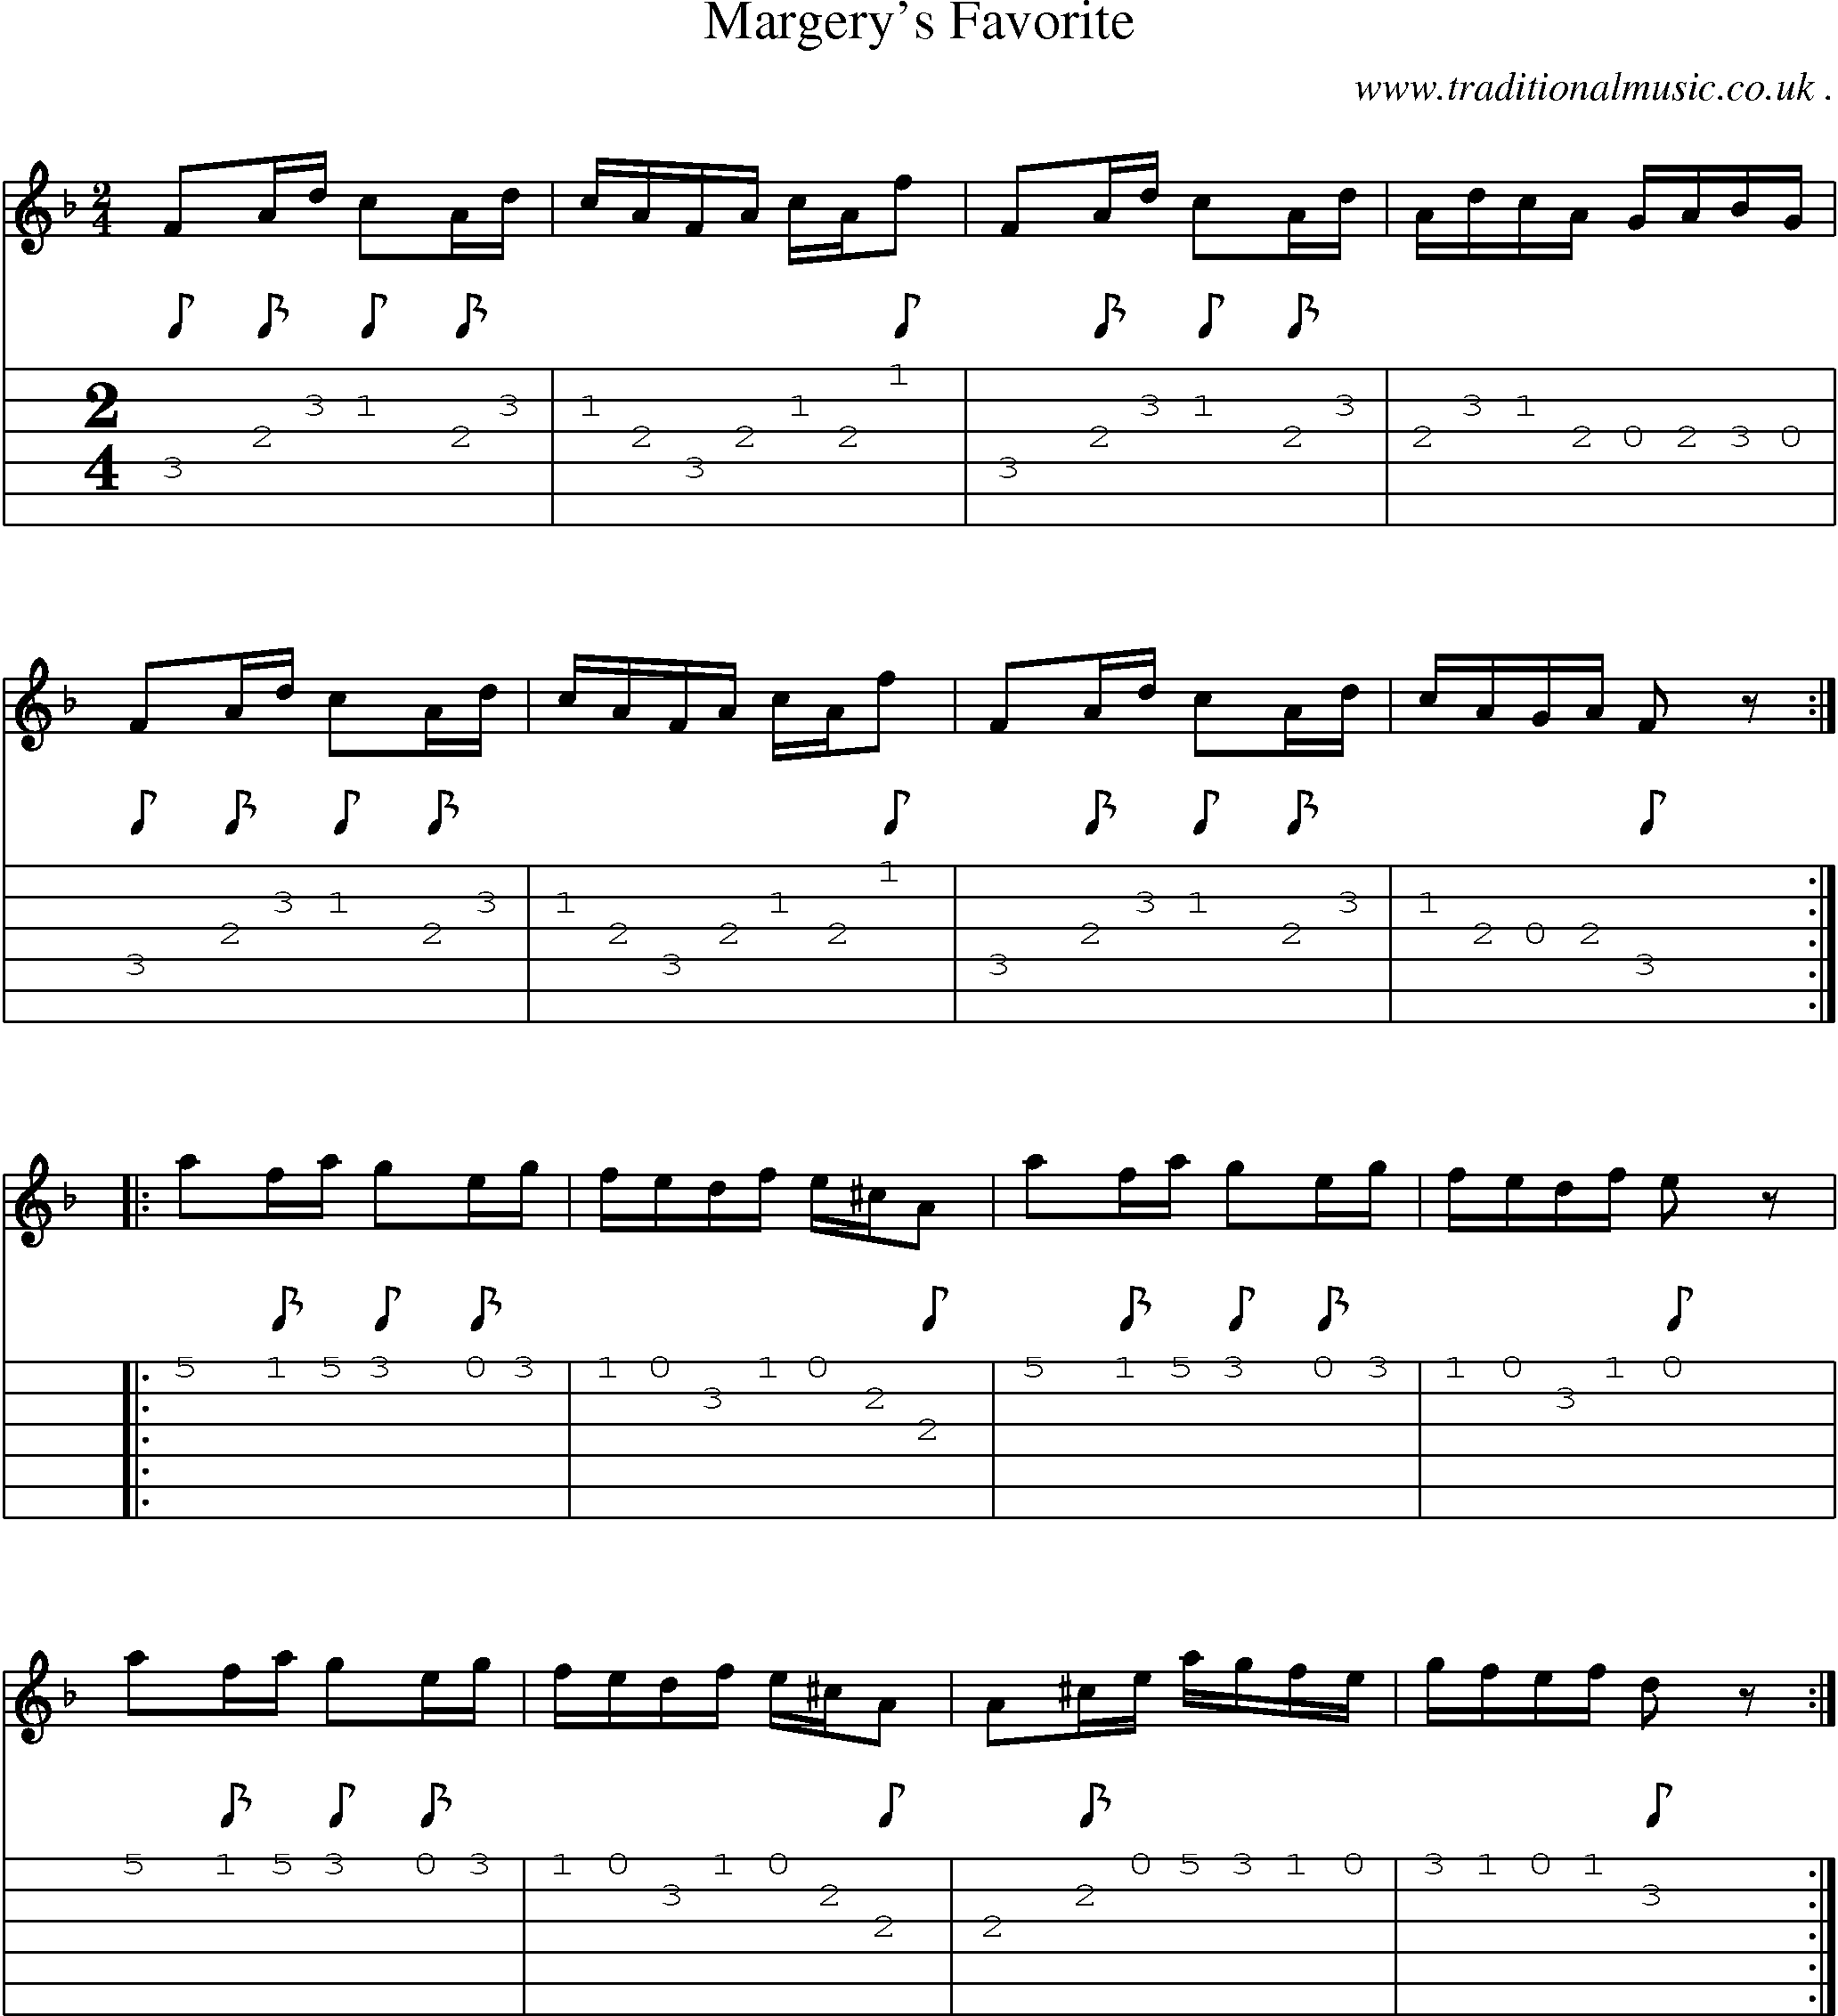 Sheet-Music and Guitar Tabs for Margerys Favorite